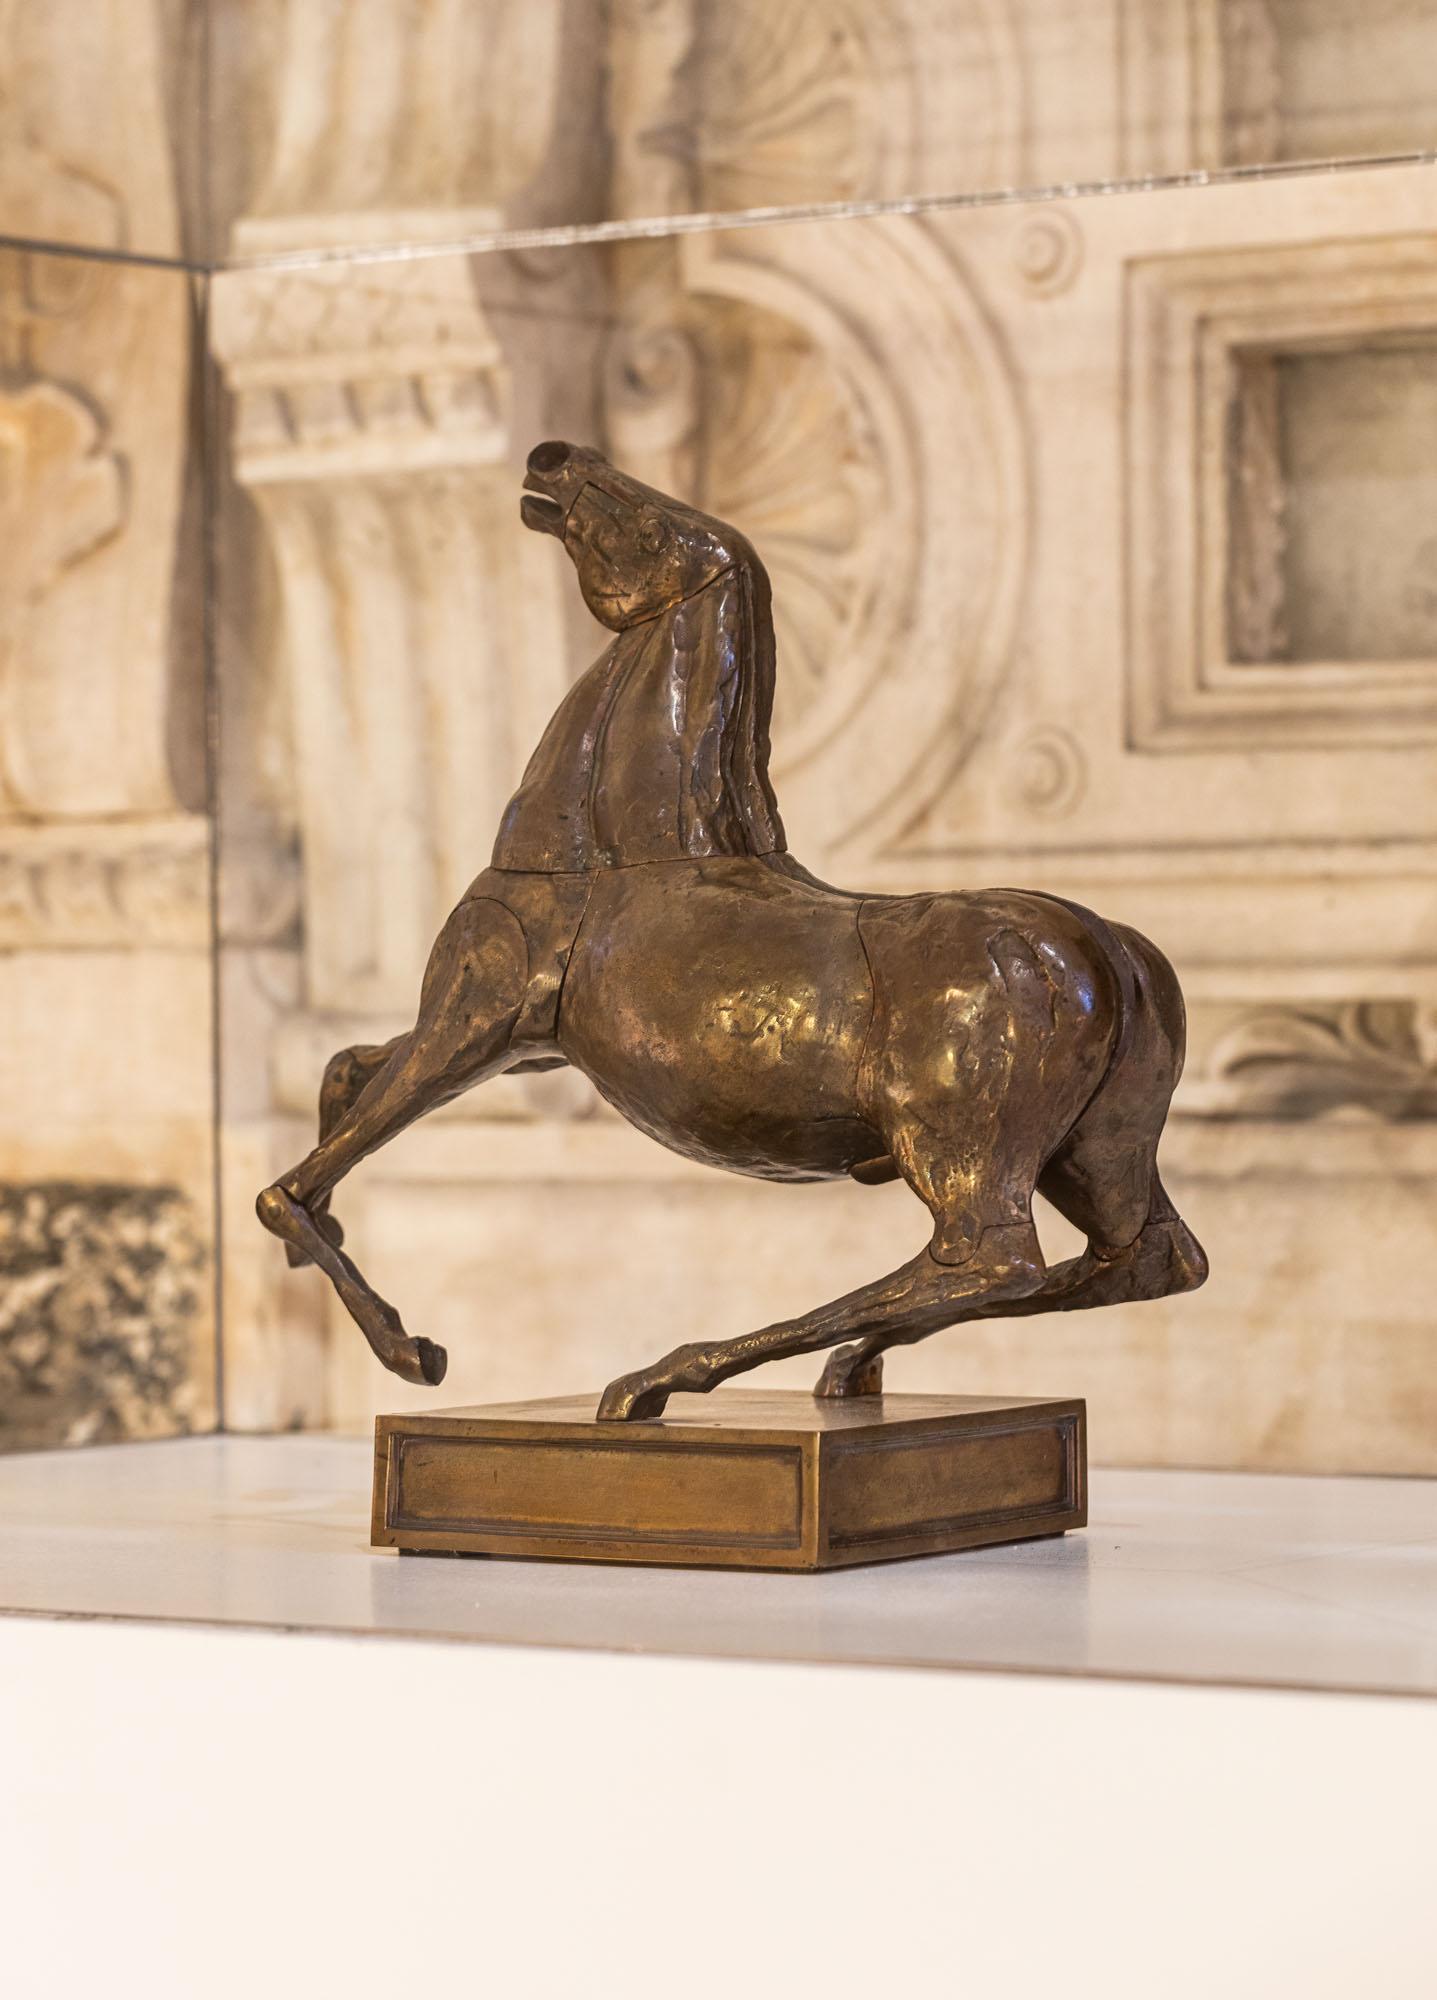 Horse bronze puzzle sculpture signed Cassinari and Miguel Berrocal.
Important collaboration between two famous artists, the Spanish sculptor Miguel Berrocal and the Italian painter and sculptor Bruno Cassinari.
Numbered and signed.
It comes with